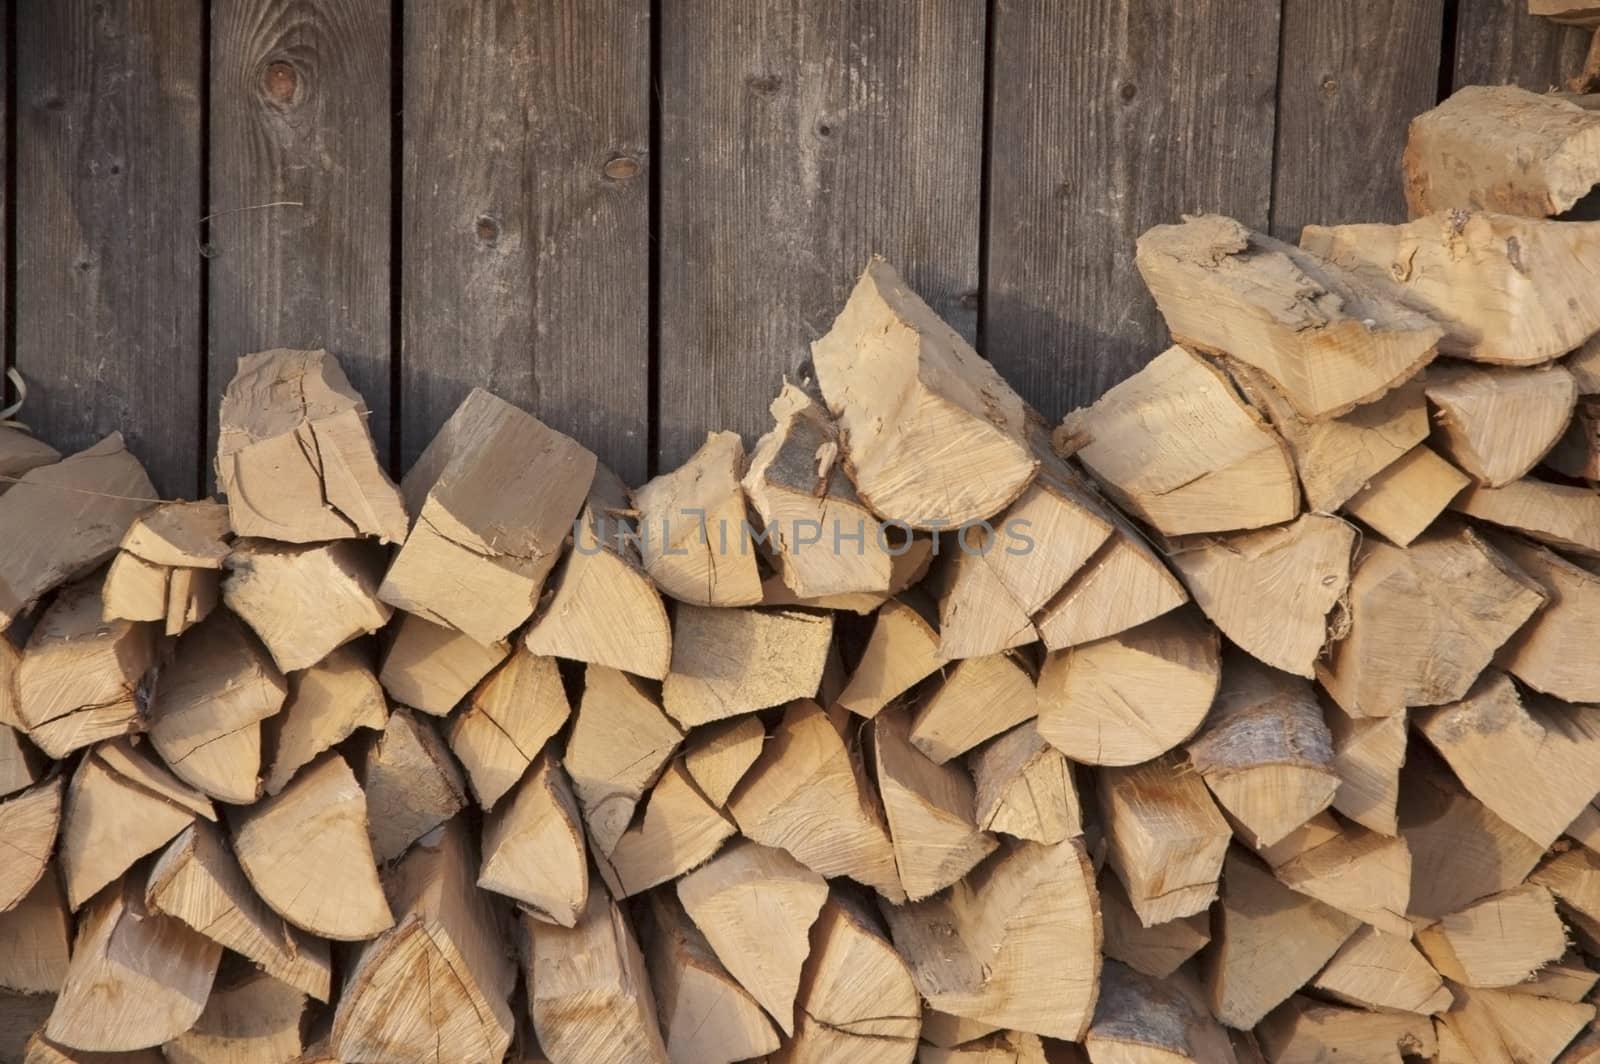 Pile of firewood against old wooden fence.